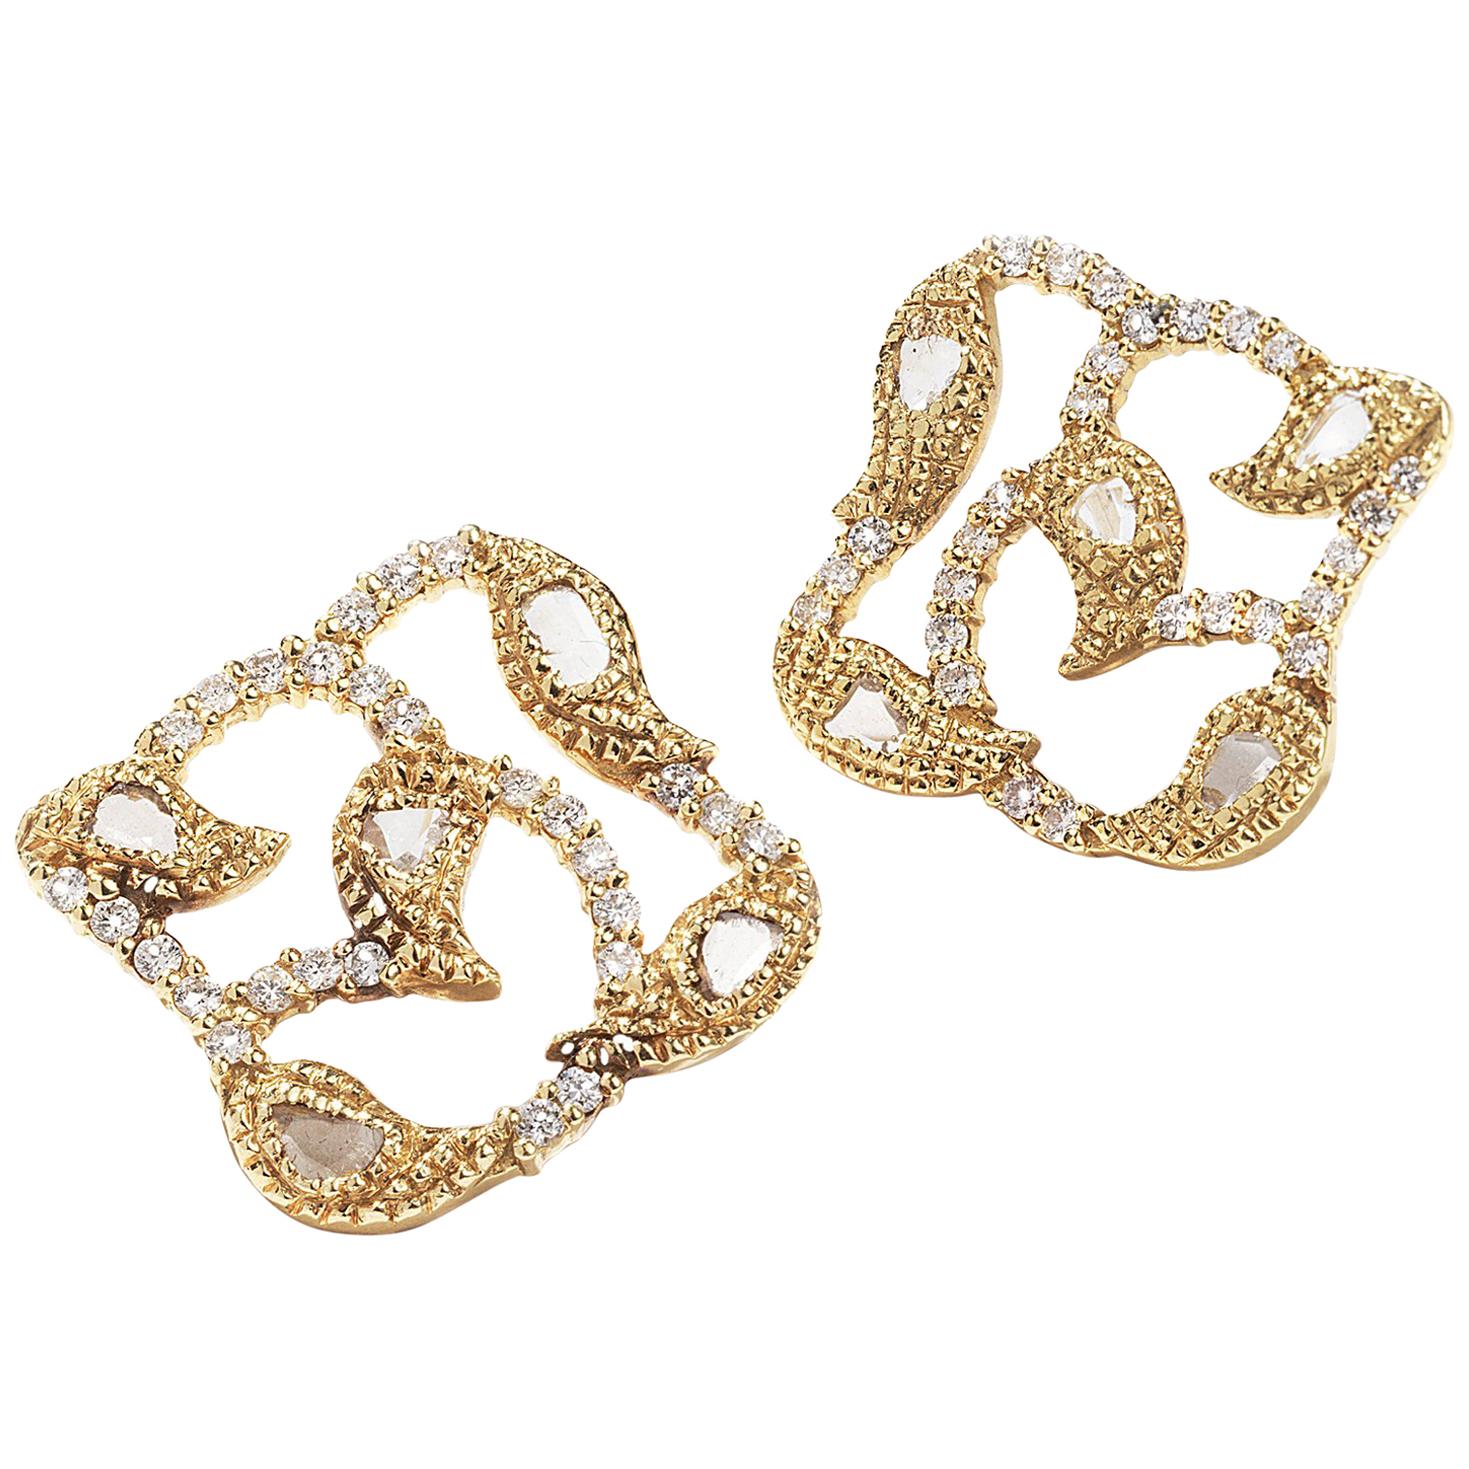 Coomi 20K Vine Post Earrings with Brilliant and Rose Cut Diamonds For Sale